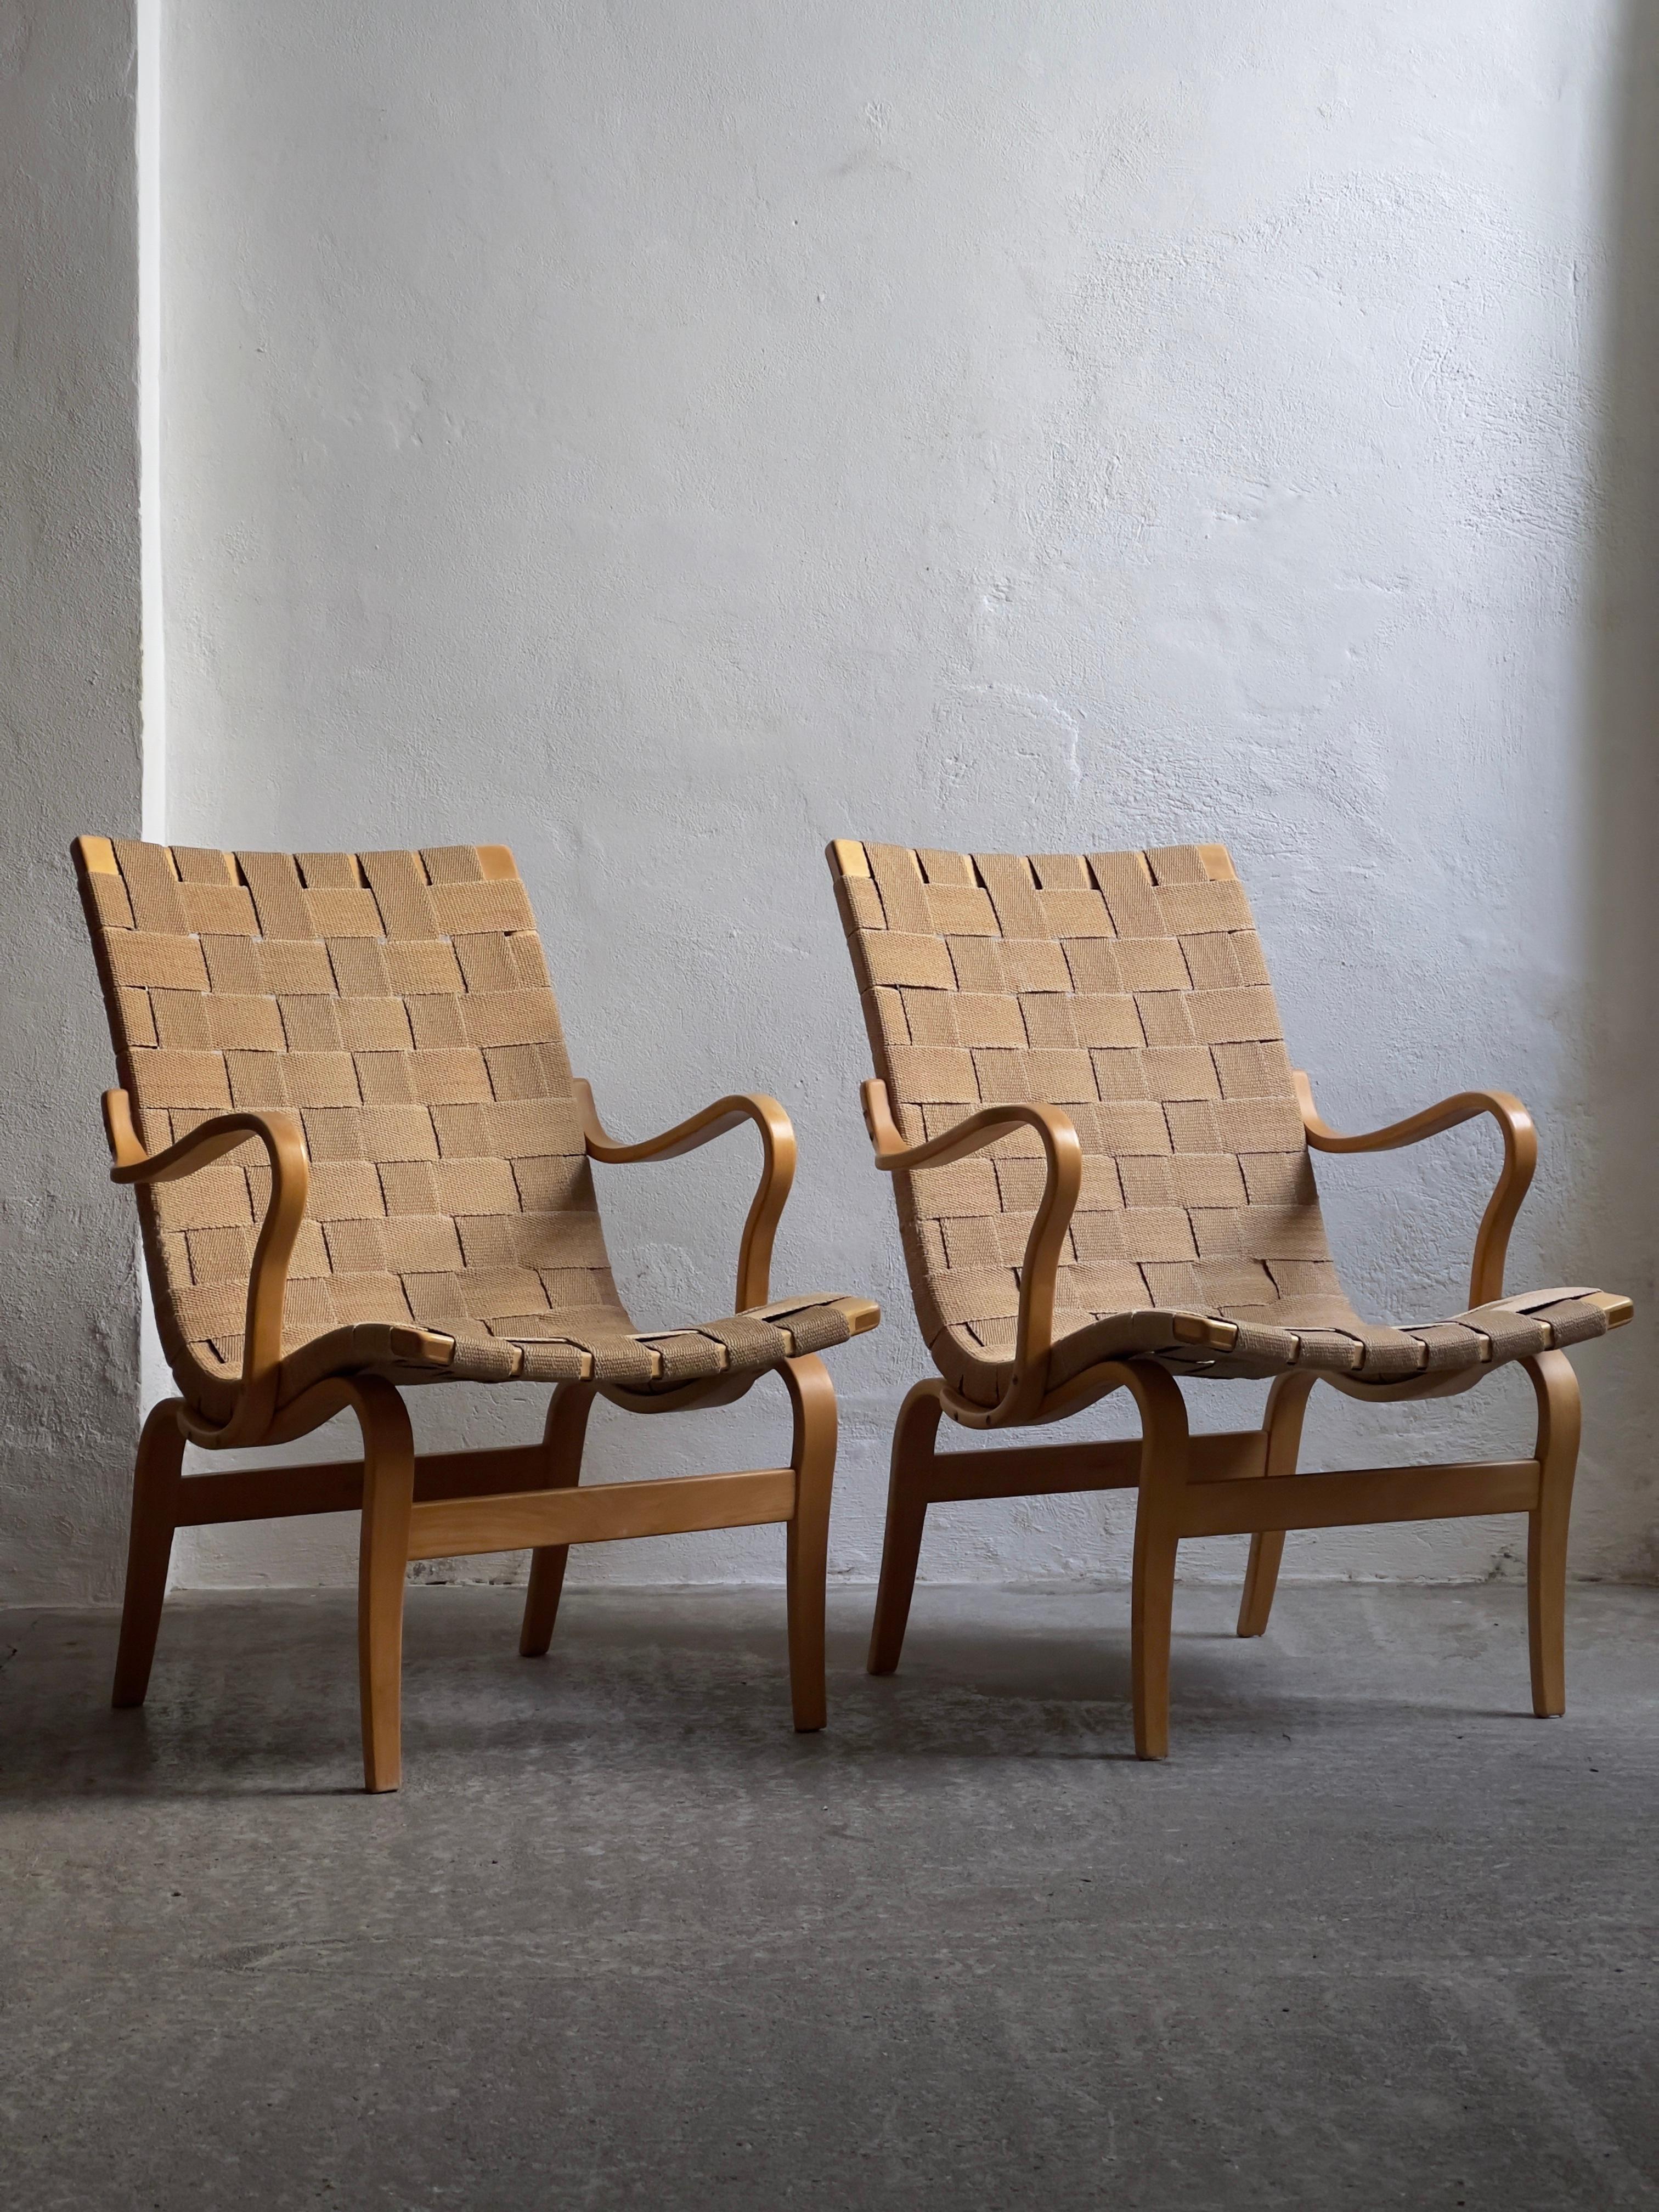 Woven Original set of 1970's Bruno Mathsson Eva Chair evenly aged and great condition.